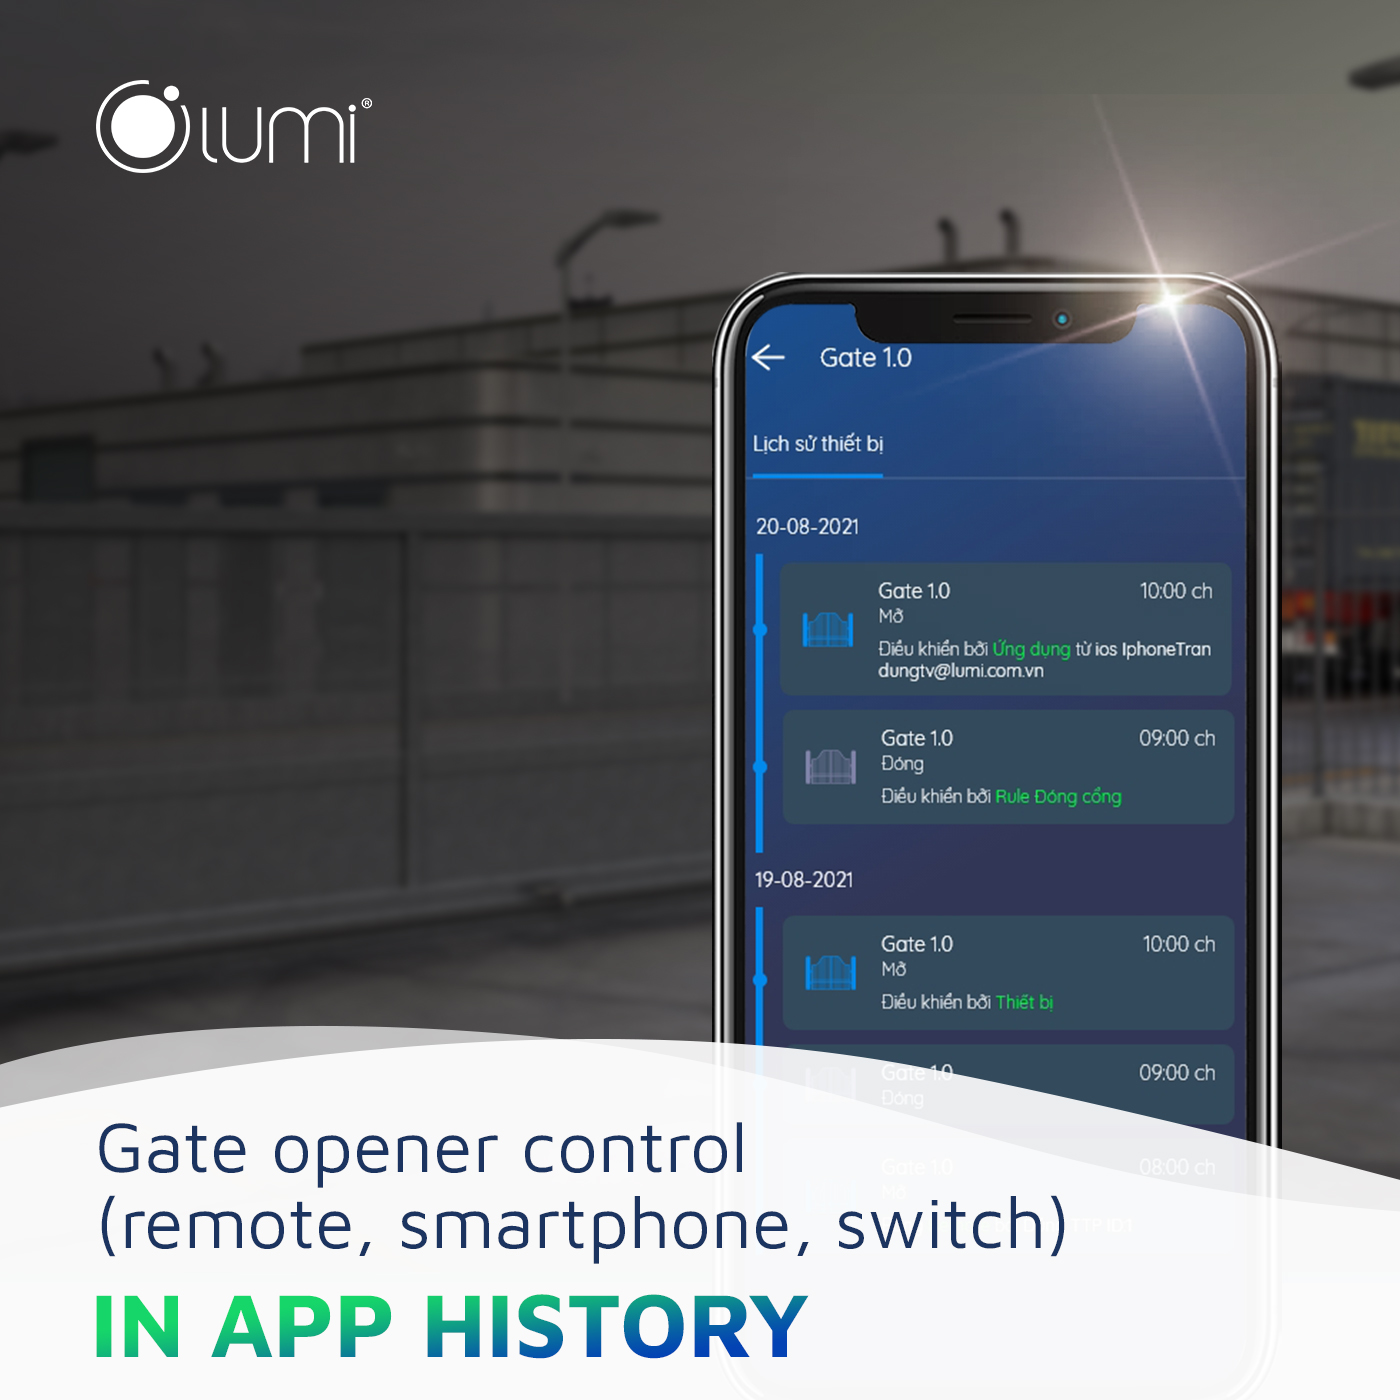 smart gate - in the app history